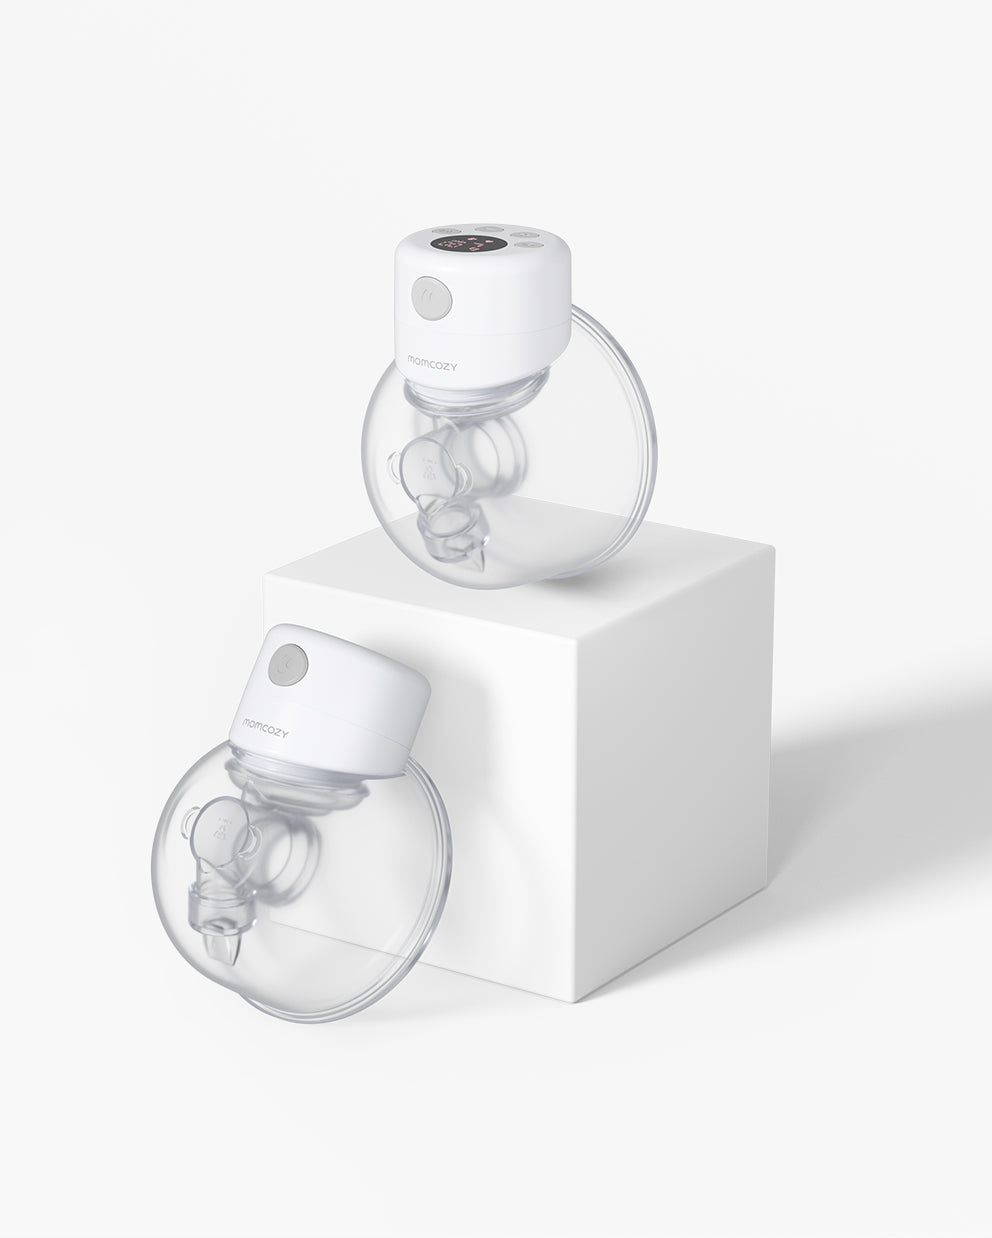 Momcozy M5 Hands Free Breast Pump for Sale in Queens, NY